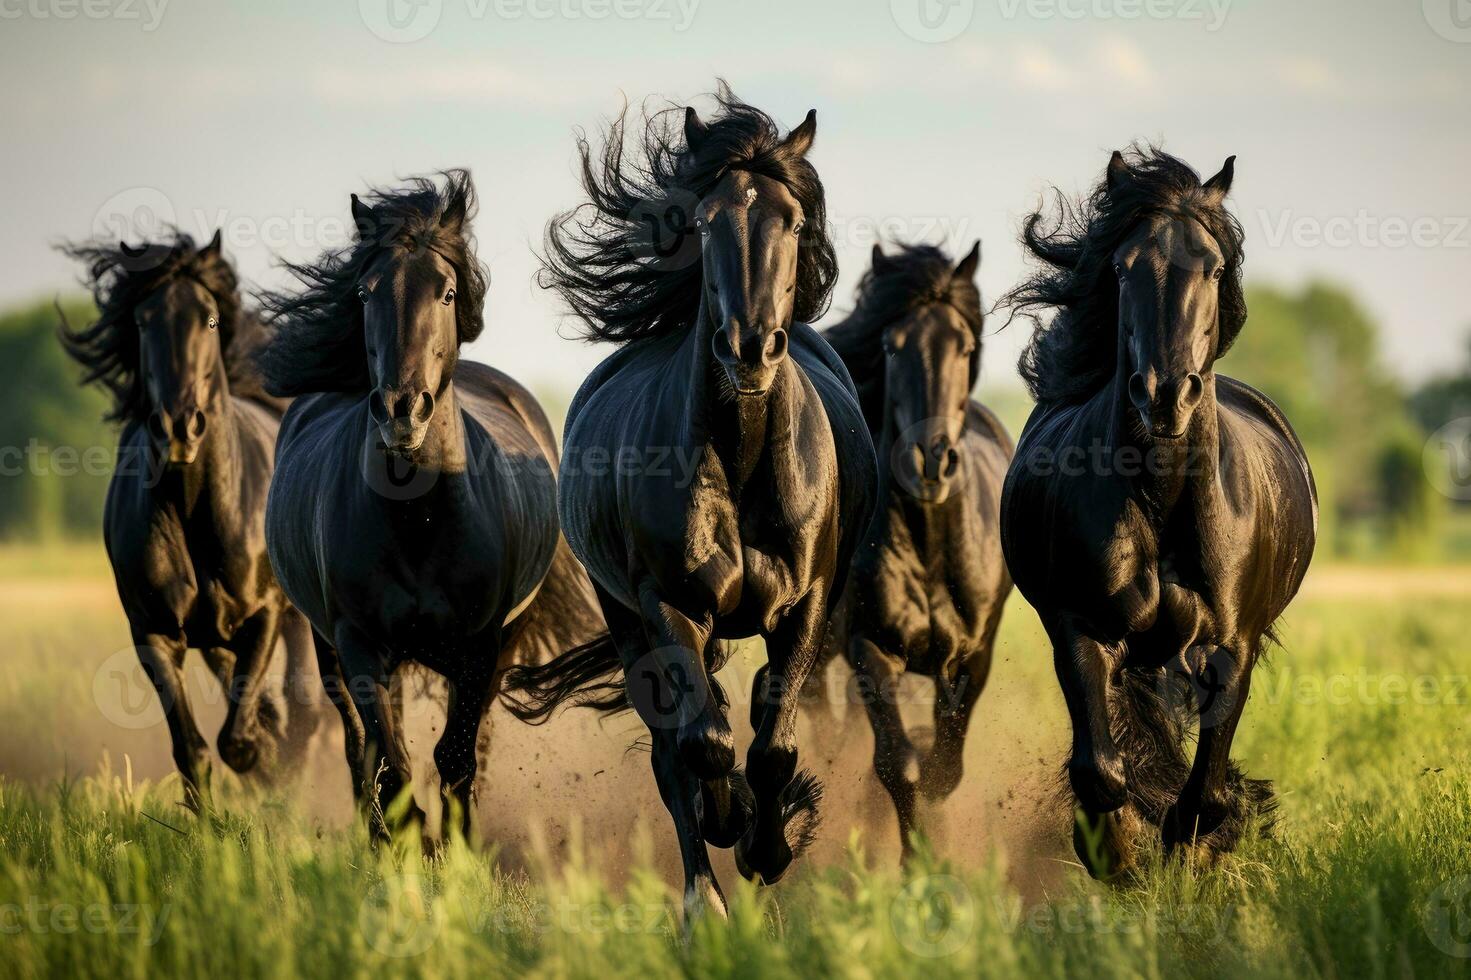 Herd of Friesian black horses galloping in the grass photo